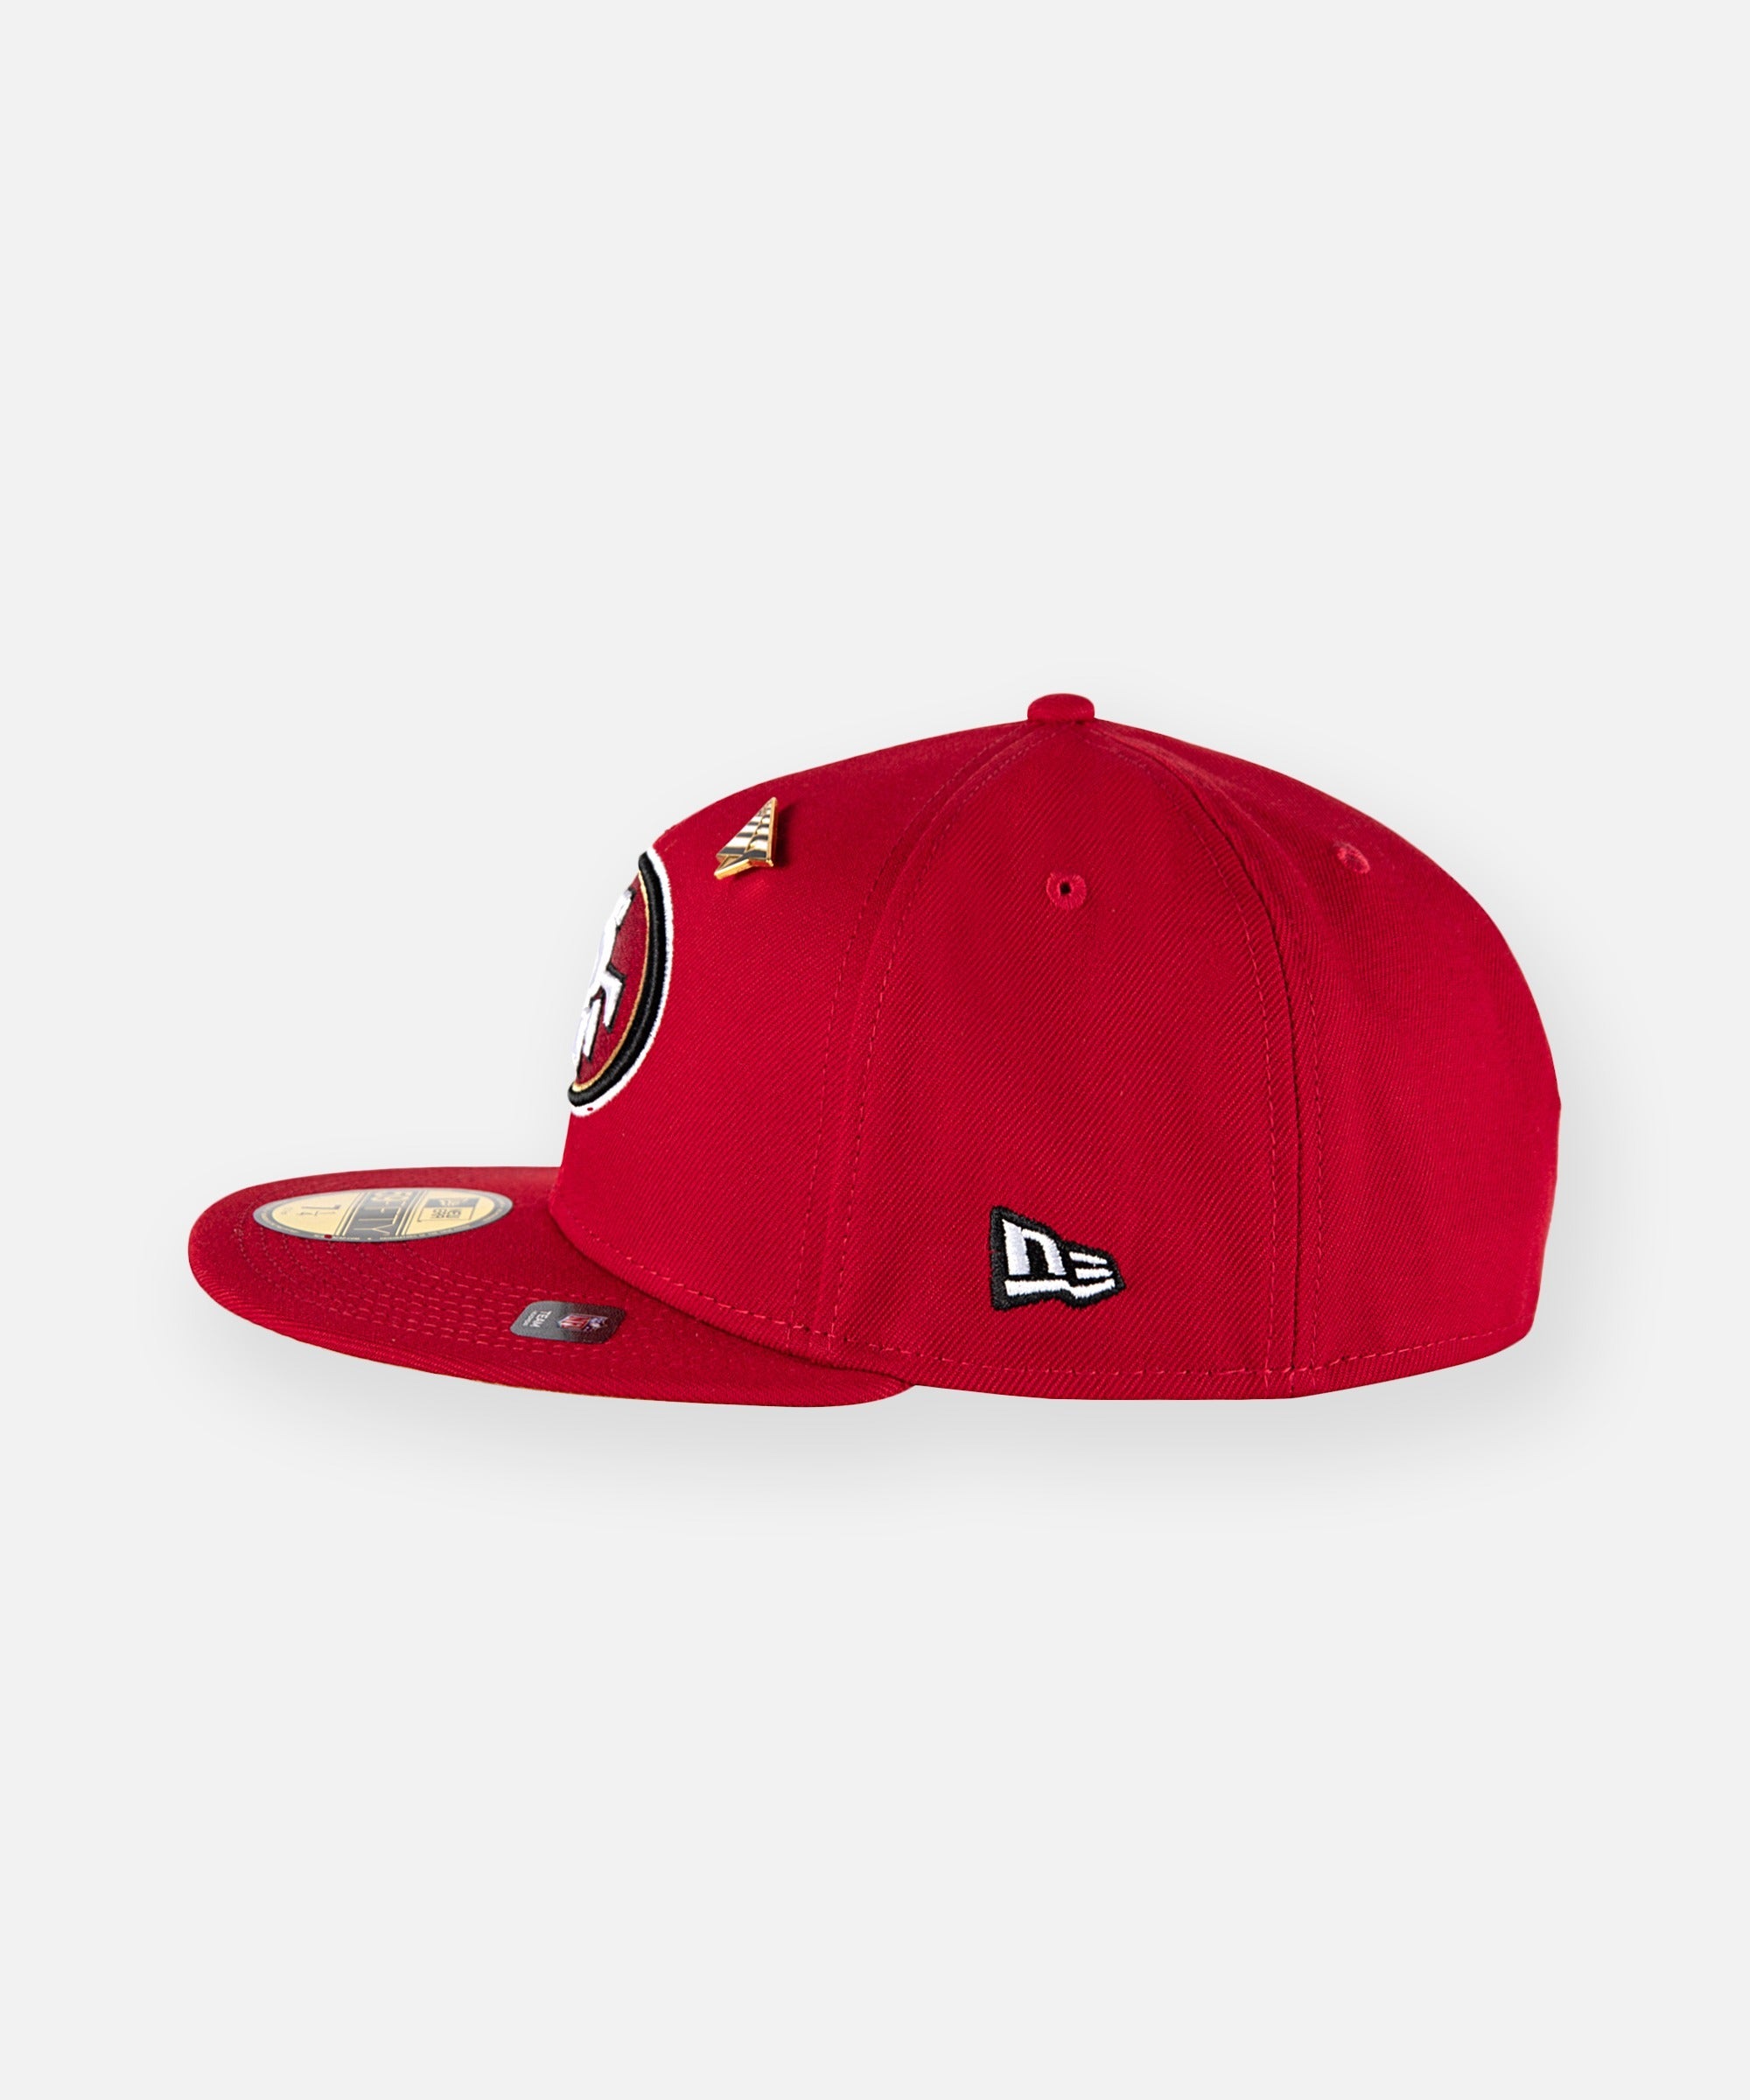 Paper Planes x San Francisco 49ers Team Color 59FIFTY Fitted Hat